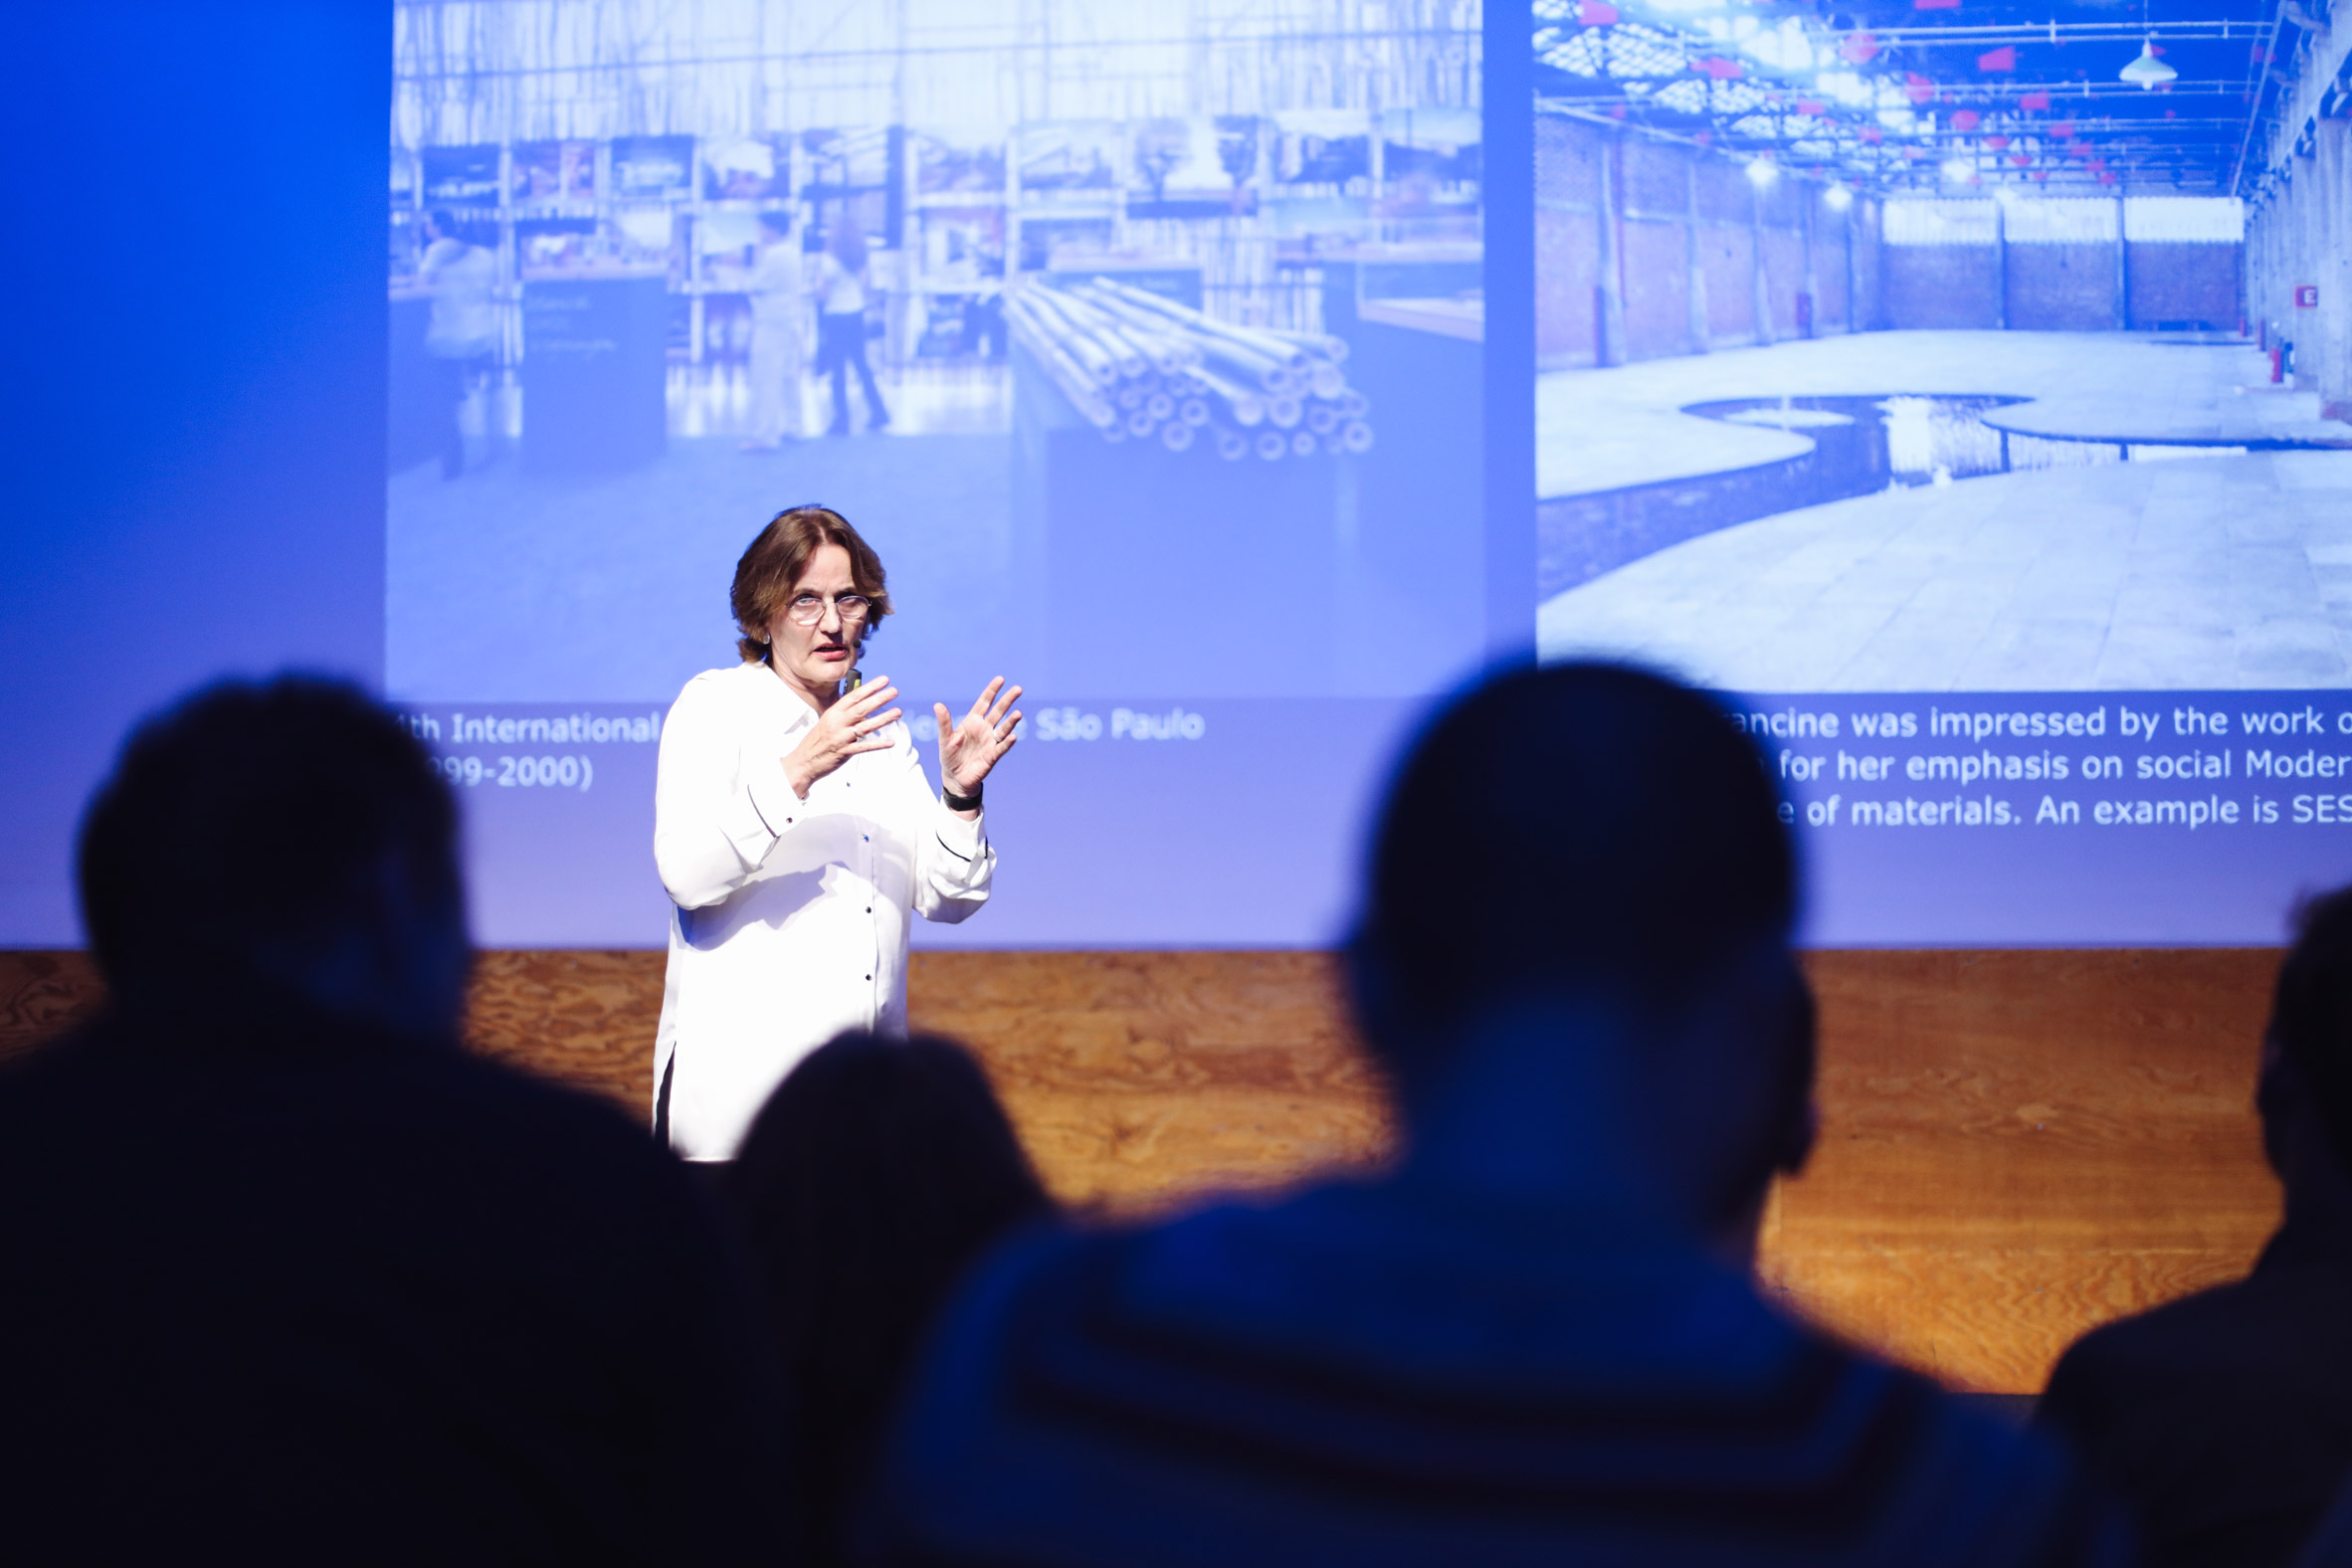 Francine Houben at Architects, not Architecture